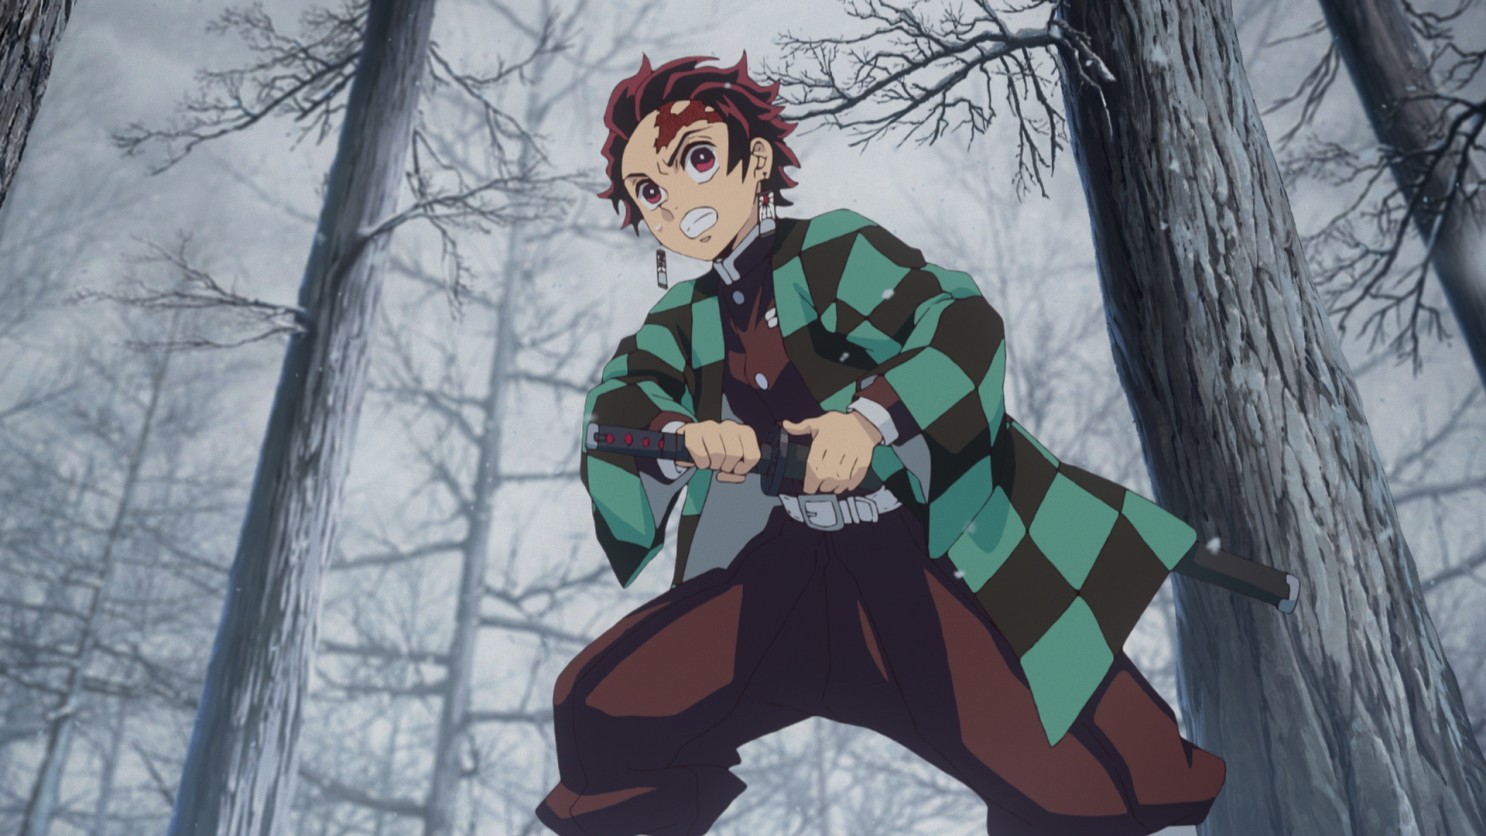 Demon Slayer Season 2: Do The Latest Updates Bring Positive News For The Fans?